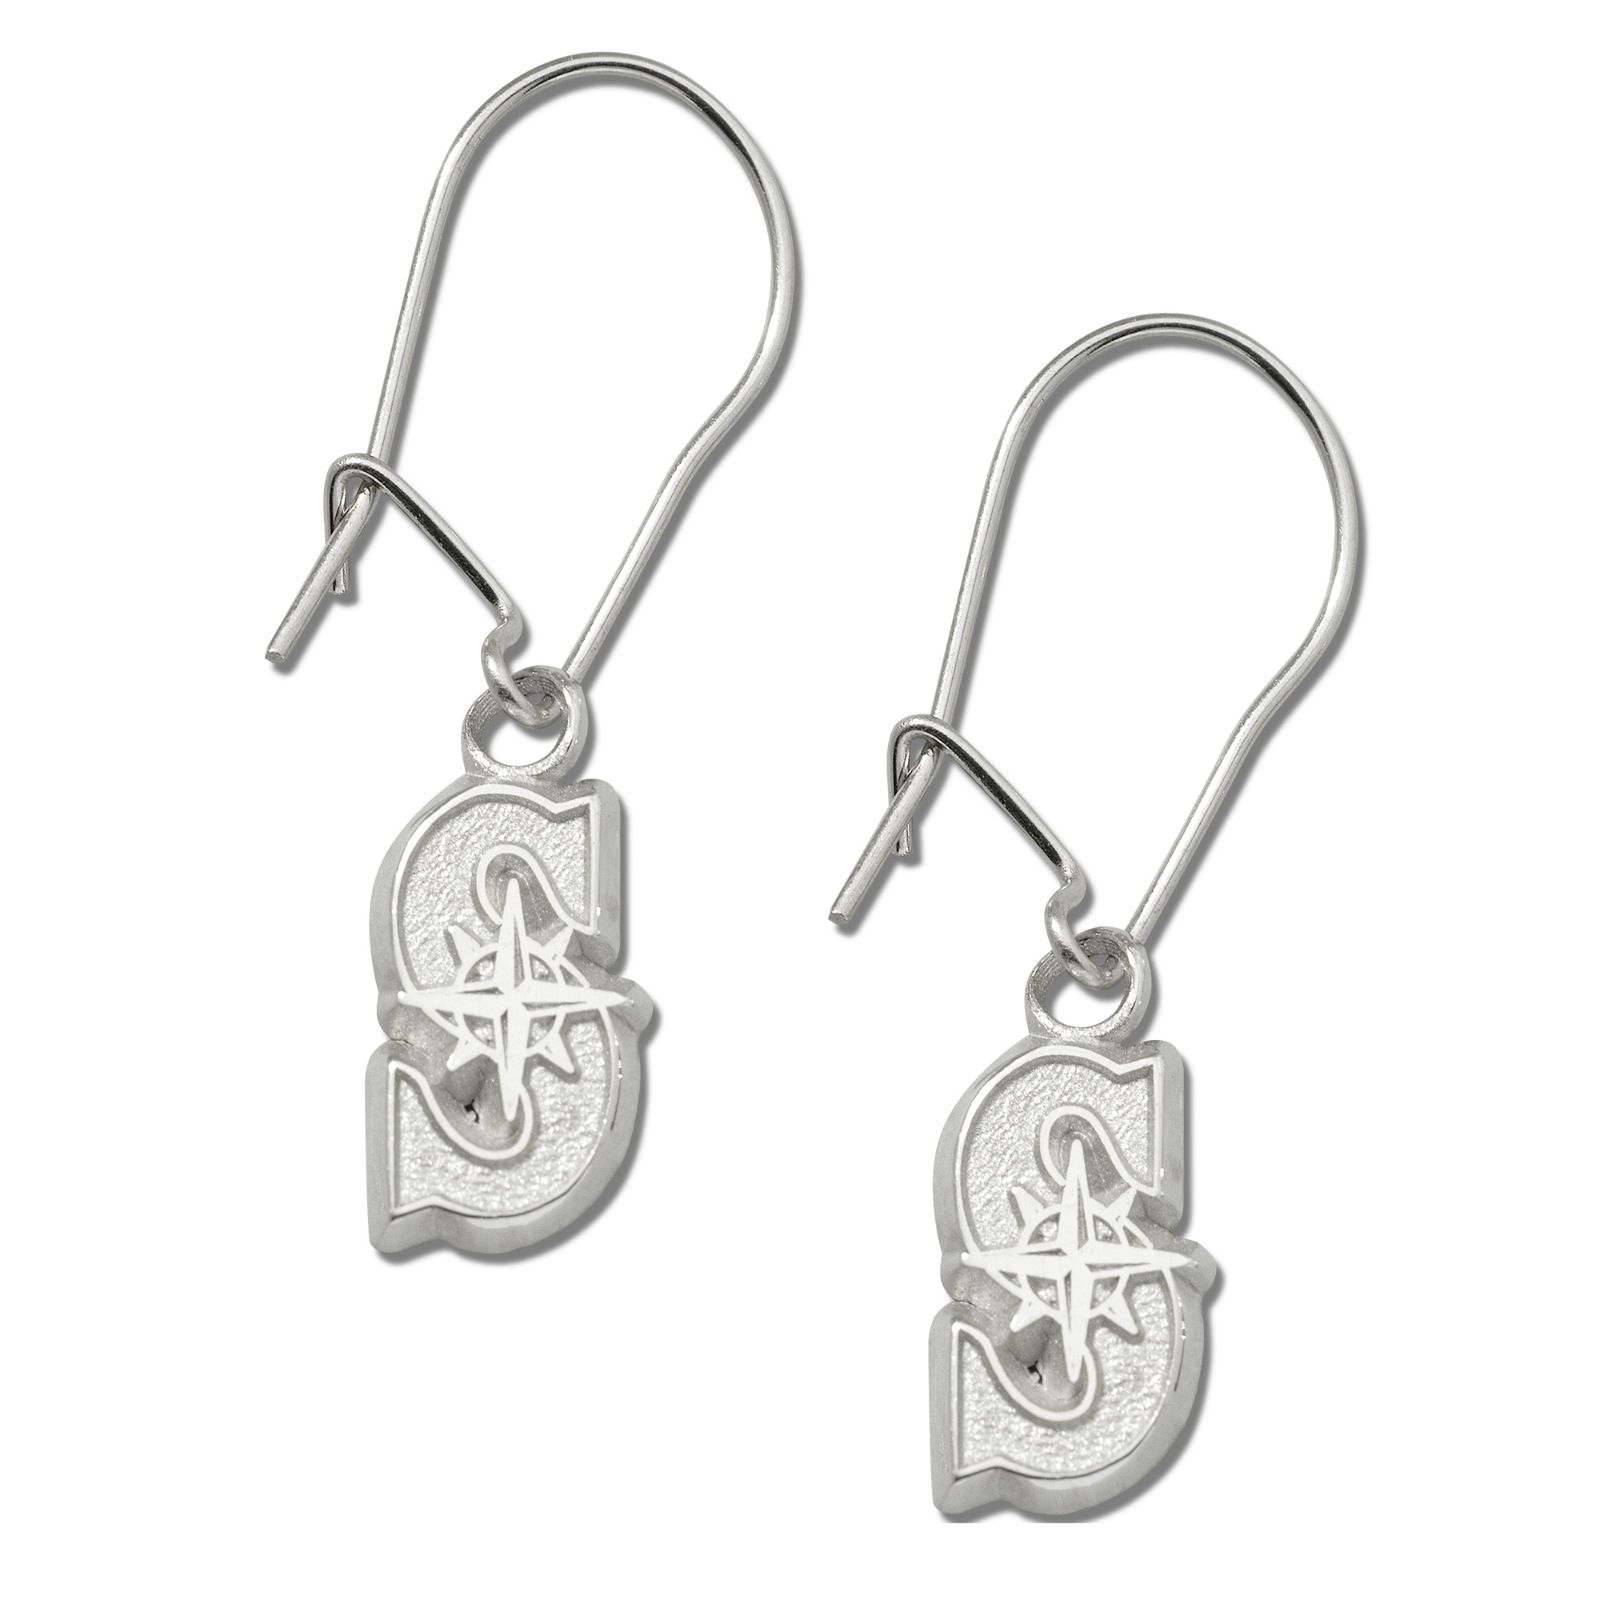 Seattle Mariners Dangle Earrings Sterling Silver or Gold Plate